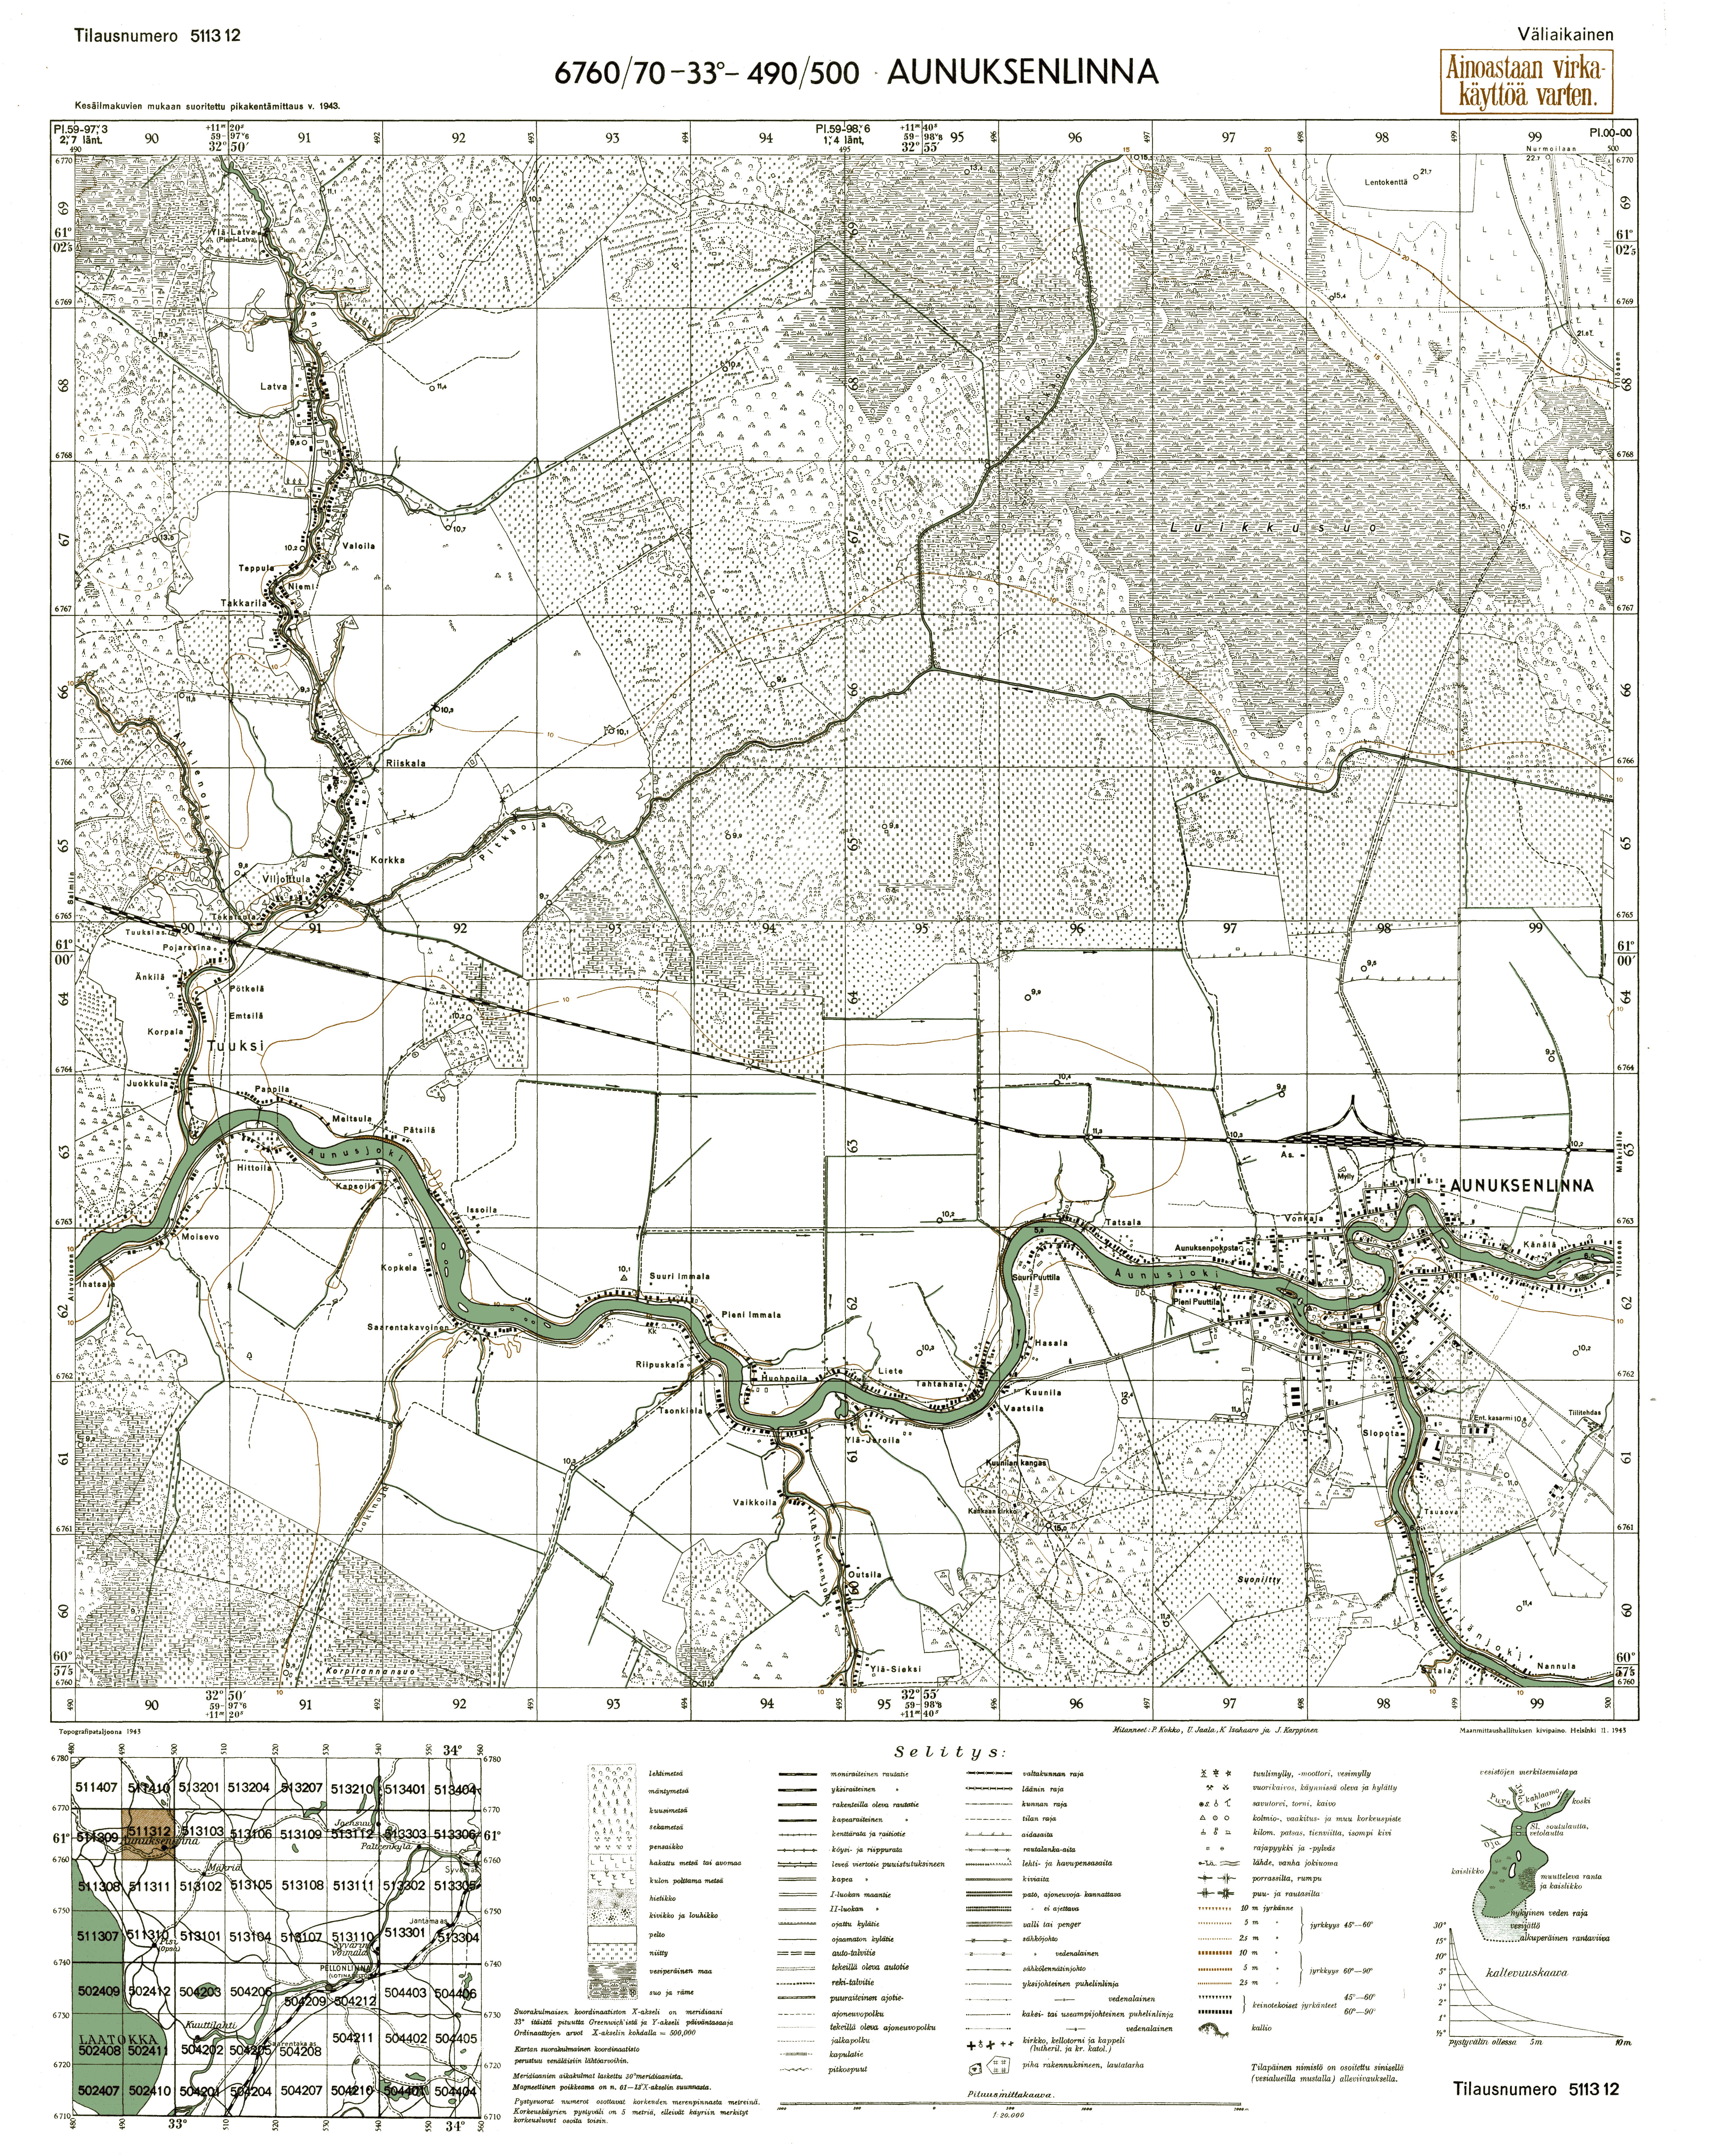 Olonets. Aunuksenlinna. Topografikartta 511312. Topographic map from 1943. Use the zooming tool to explore in higher level of detail. Obtain as a quality print or high resolution image